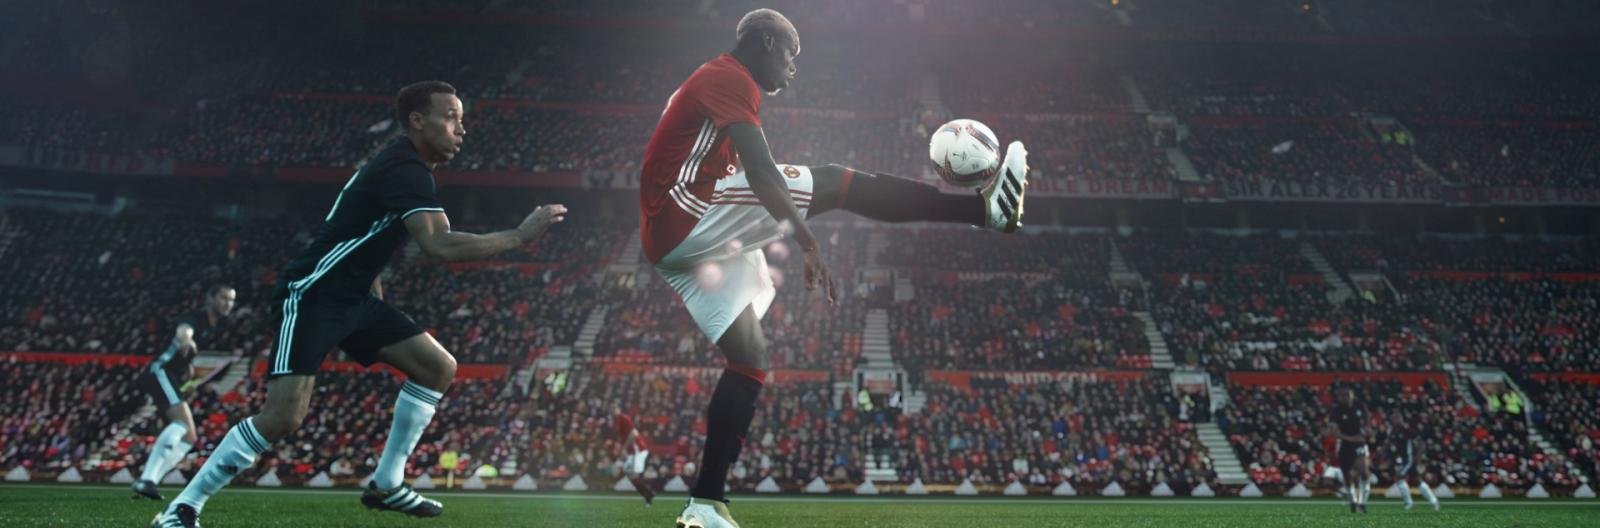 Manchester United’s Pogba stars in new adidas film ahead of Red Monday clash